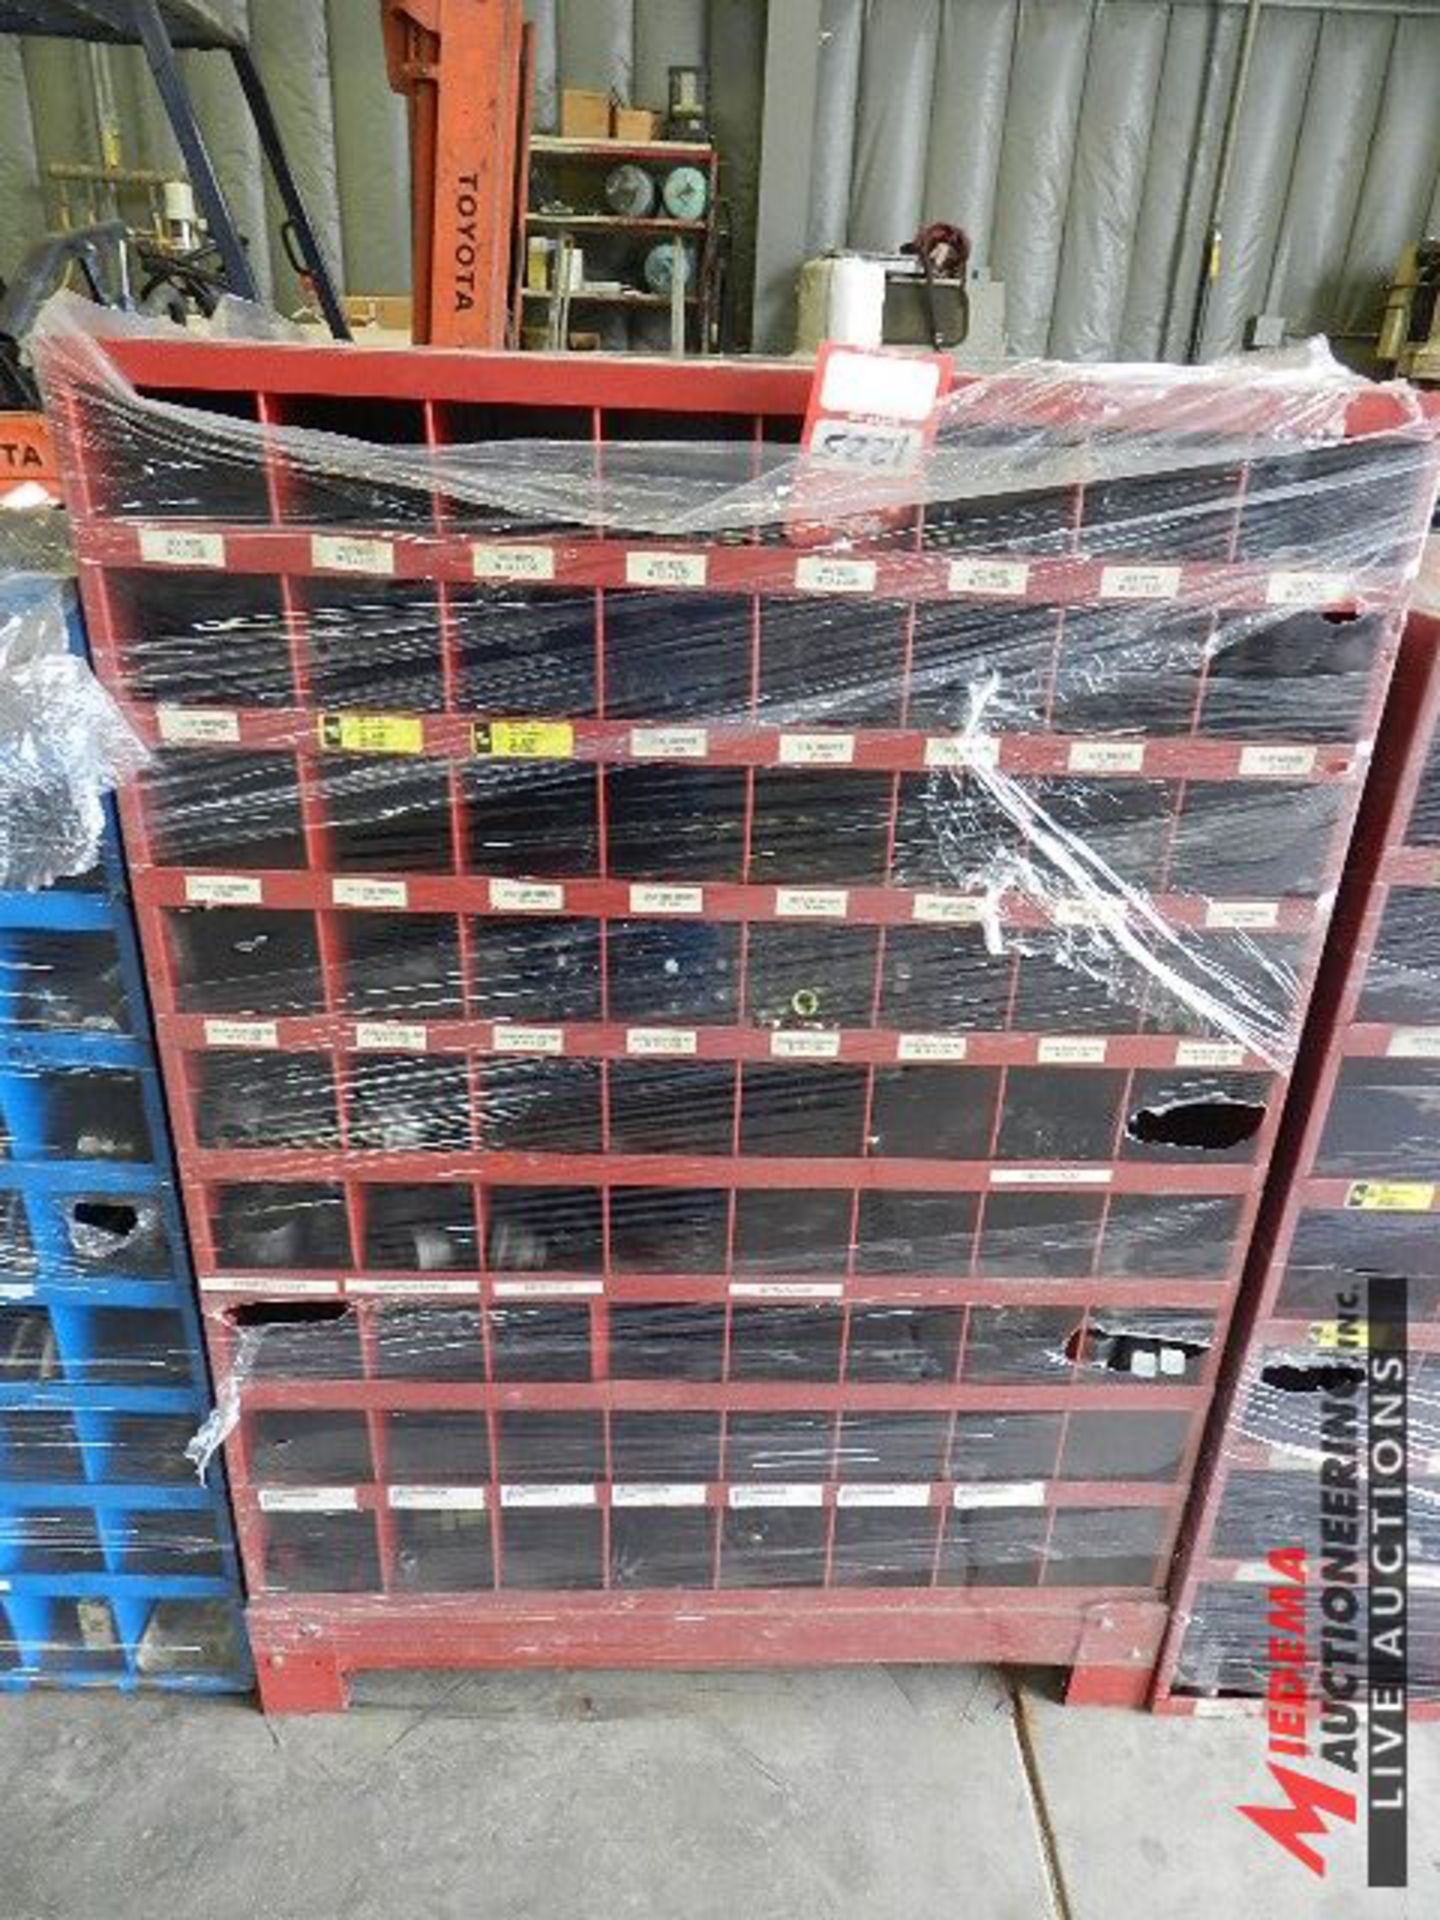 72 SLOT PARTS BIN WITH ASSORTED PIPE FITTINGS, NUTS, BOLTS AND WASHERS - Bild 3 aus 3